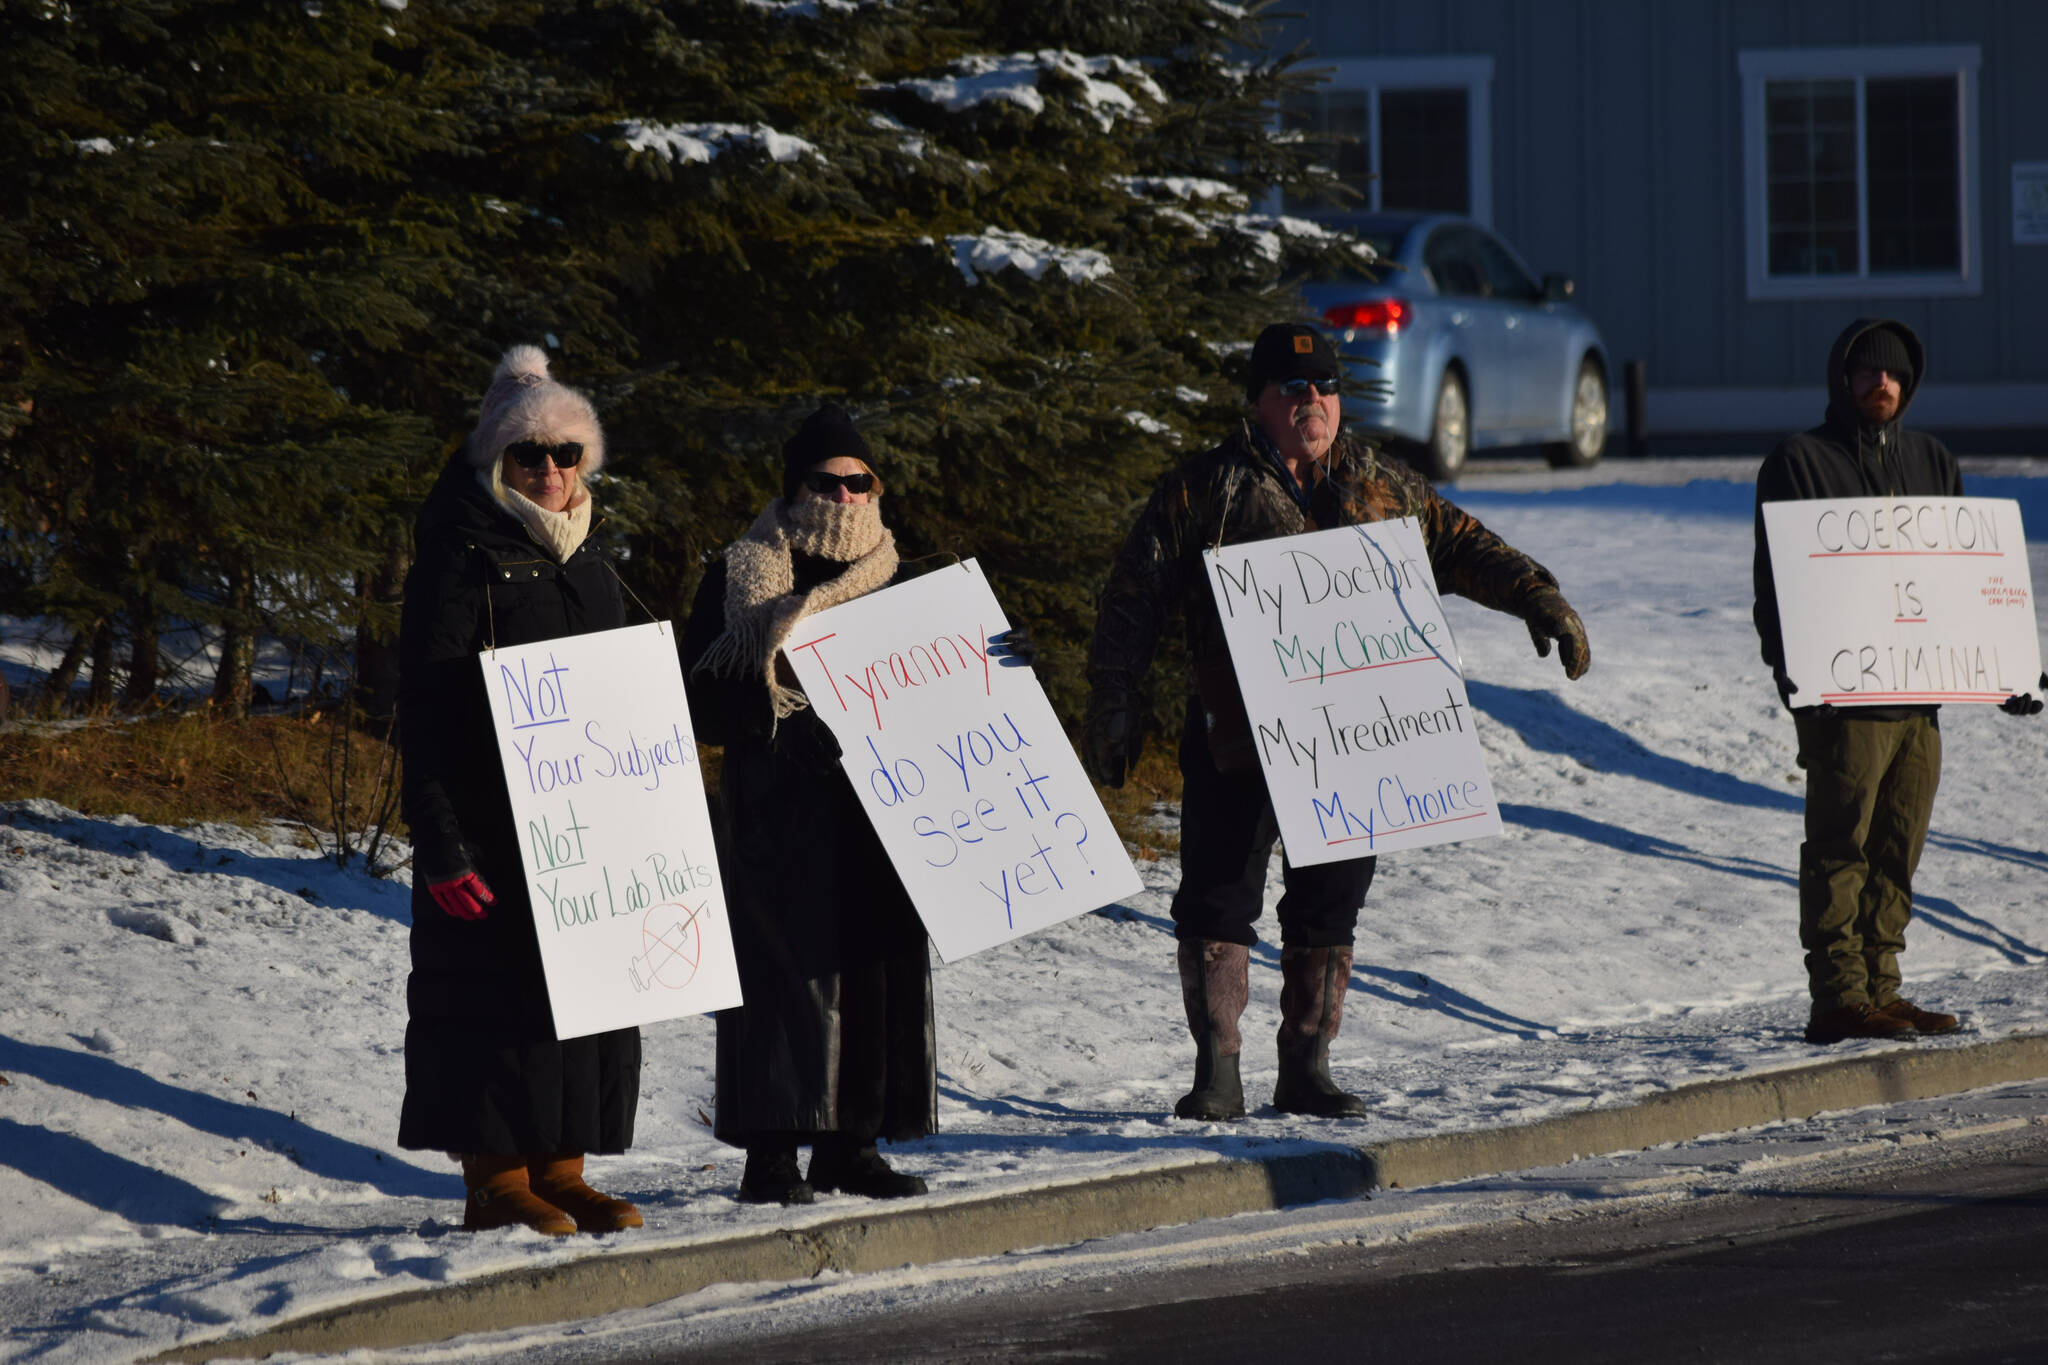 Demonstrators gather outside of Central Peninsula Hospital in Soldotna to protest COVID-19 vaccine mandates and advocate for alternative treatments on Saturday, Nov. 20, 2021. (Camille Botello/Peninsula Clarion)